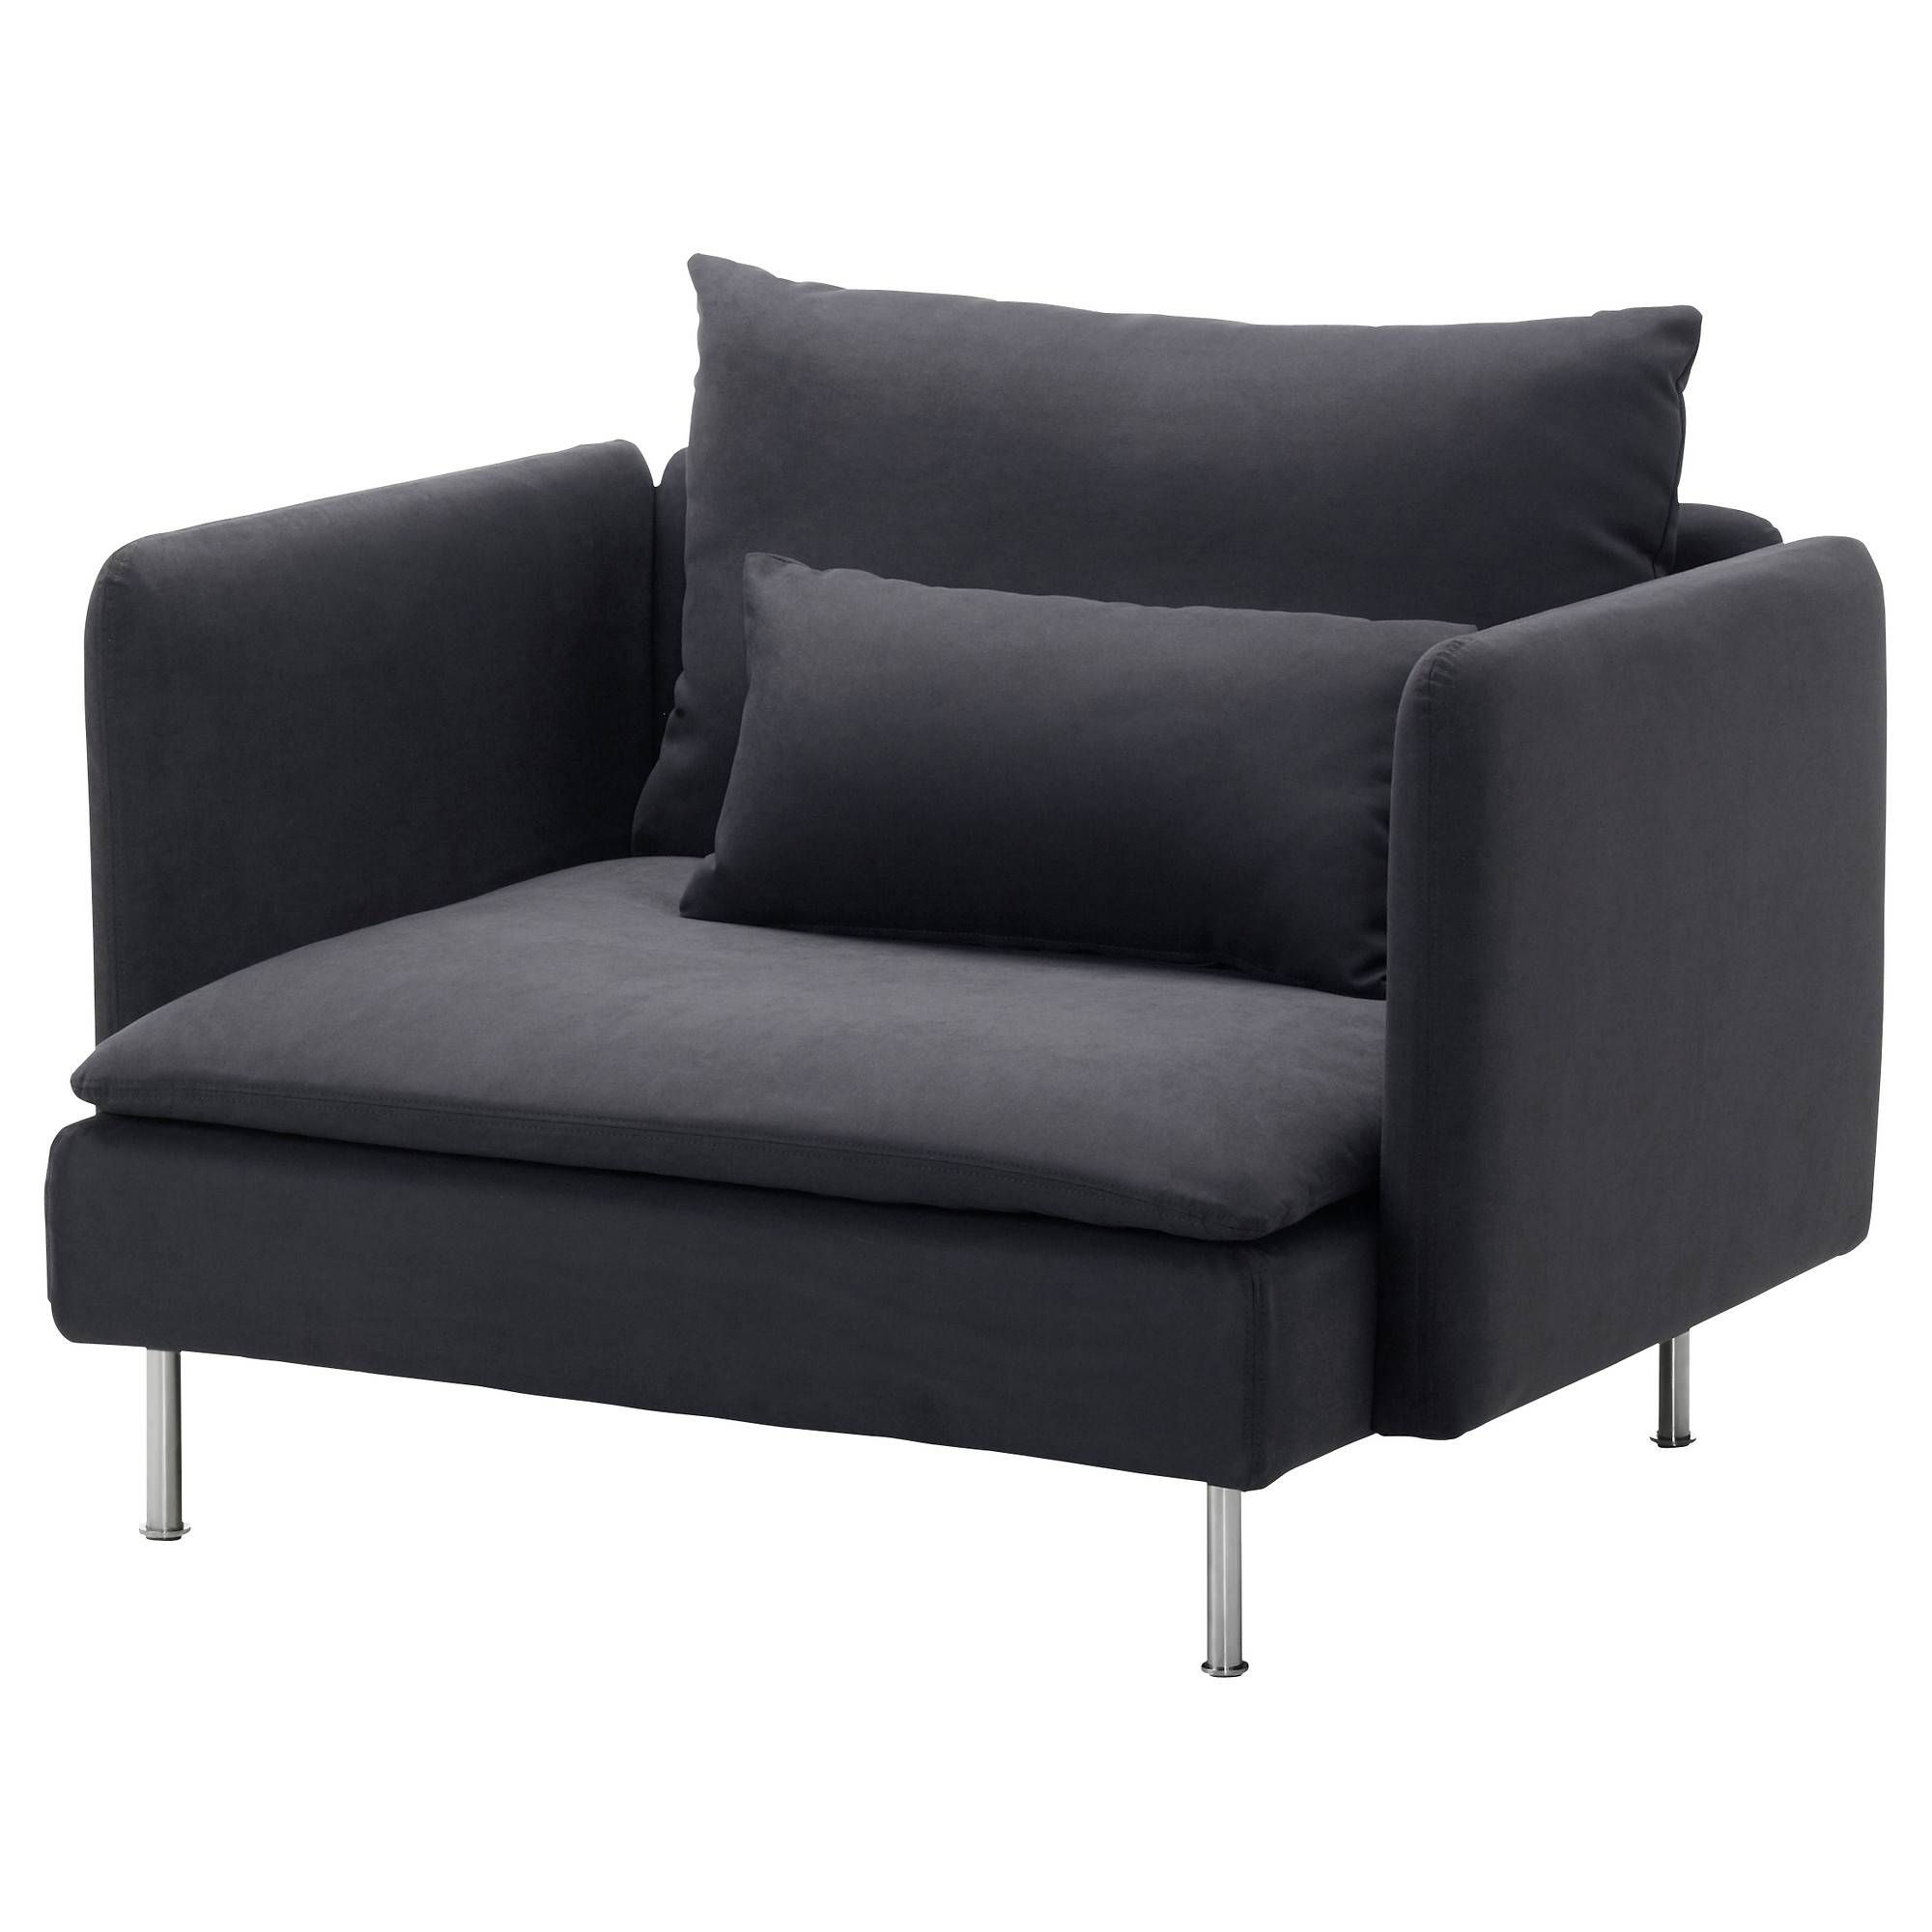 Sectional Sofas & Couches – Ikea With Regard To Manstad Sofa Bed Ikea (Photo 14 of 25)